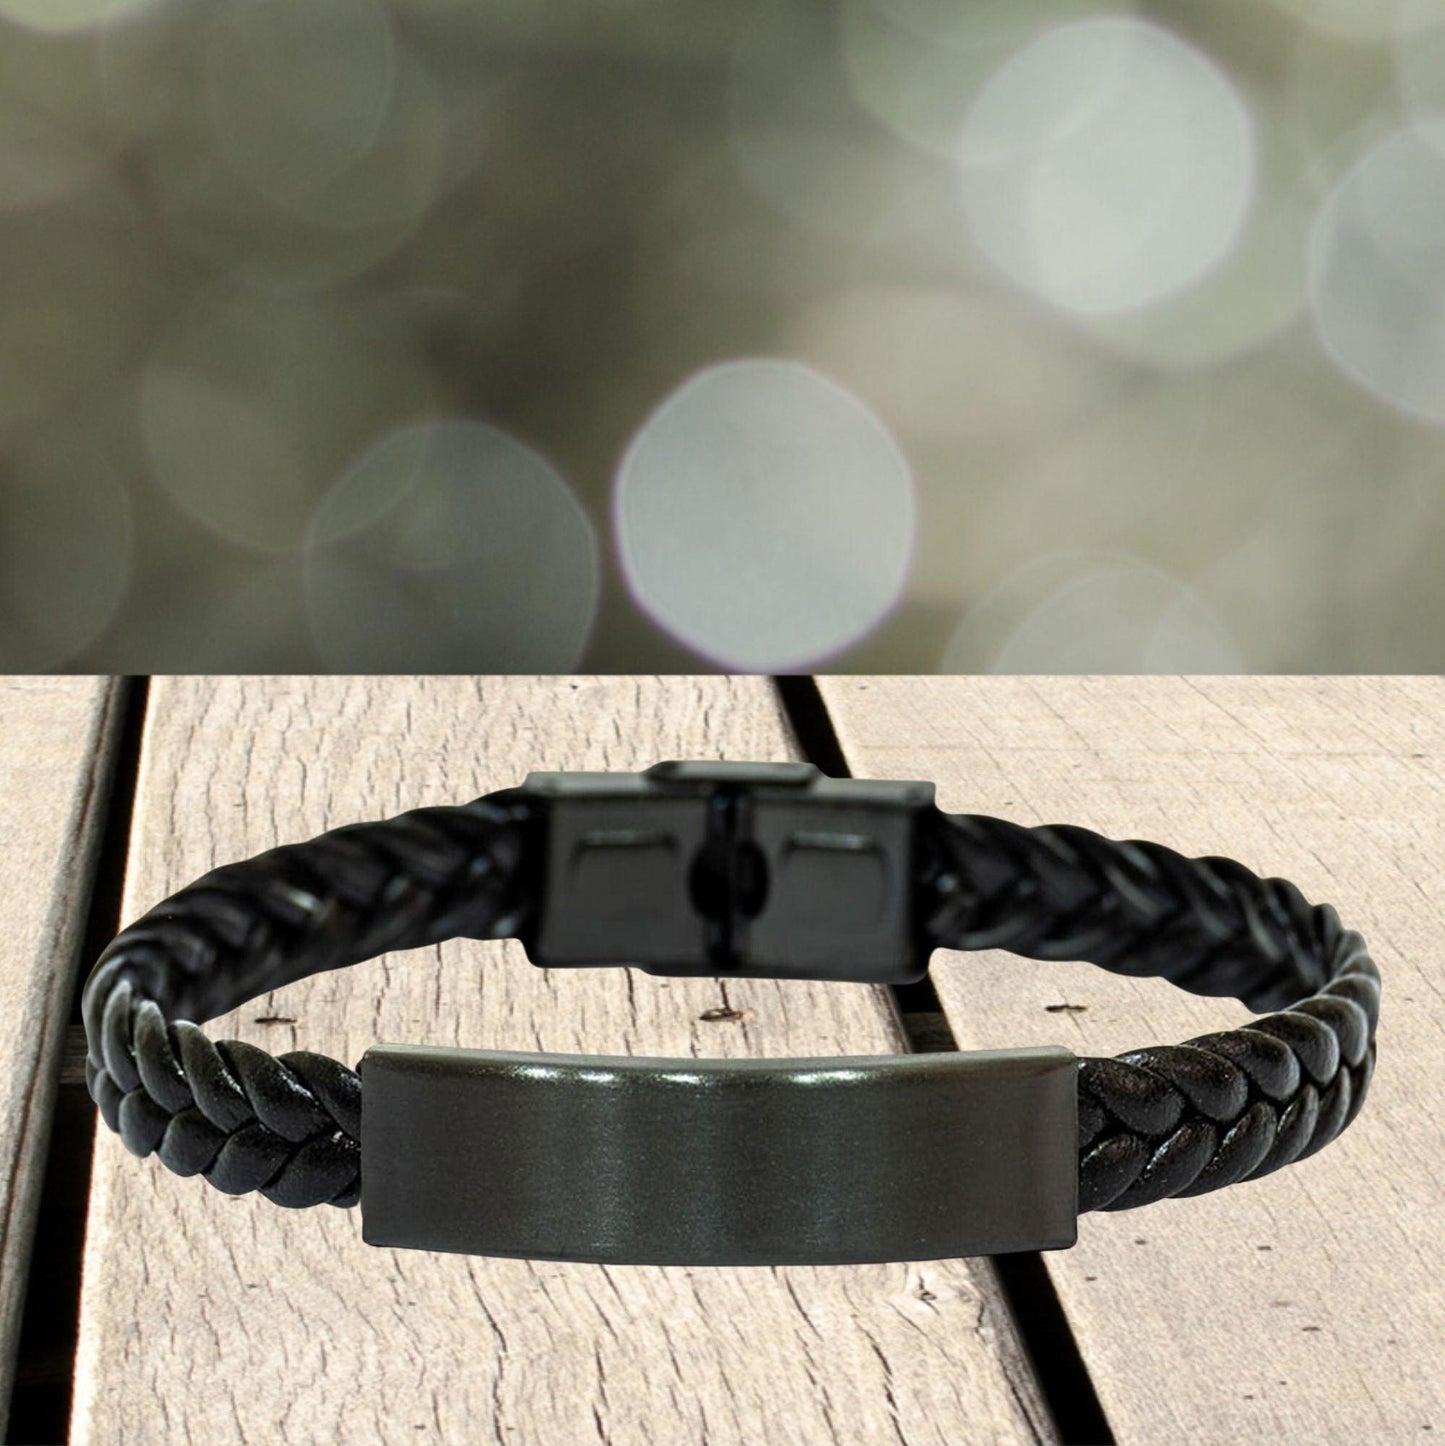 Aunt Christmas Perfect Gifts, Aunt Braided Leather Bracelet, Motivational Aunt Engraved Gifts, Birthday Gifts For Aunt, To My Aunt Life is learning to dance in the rain, finding good in each day. I'm always with you